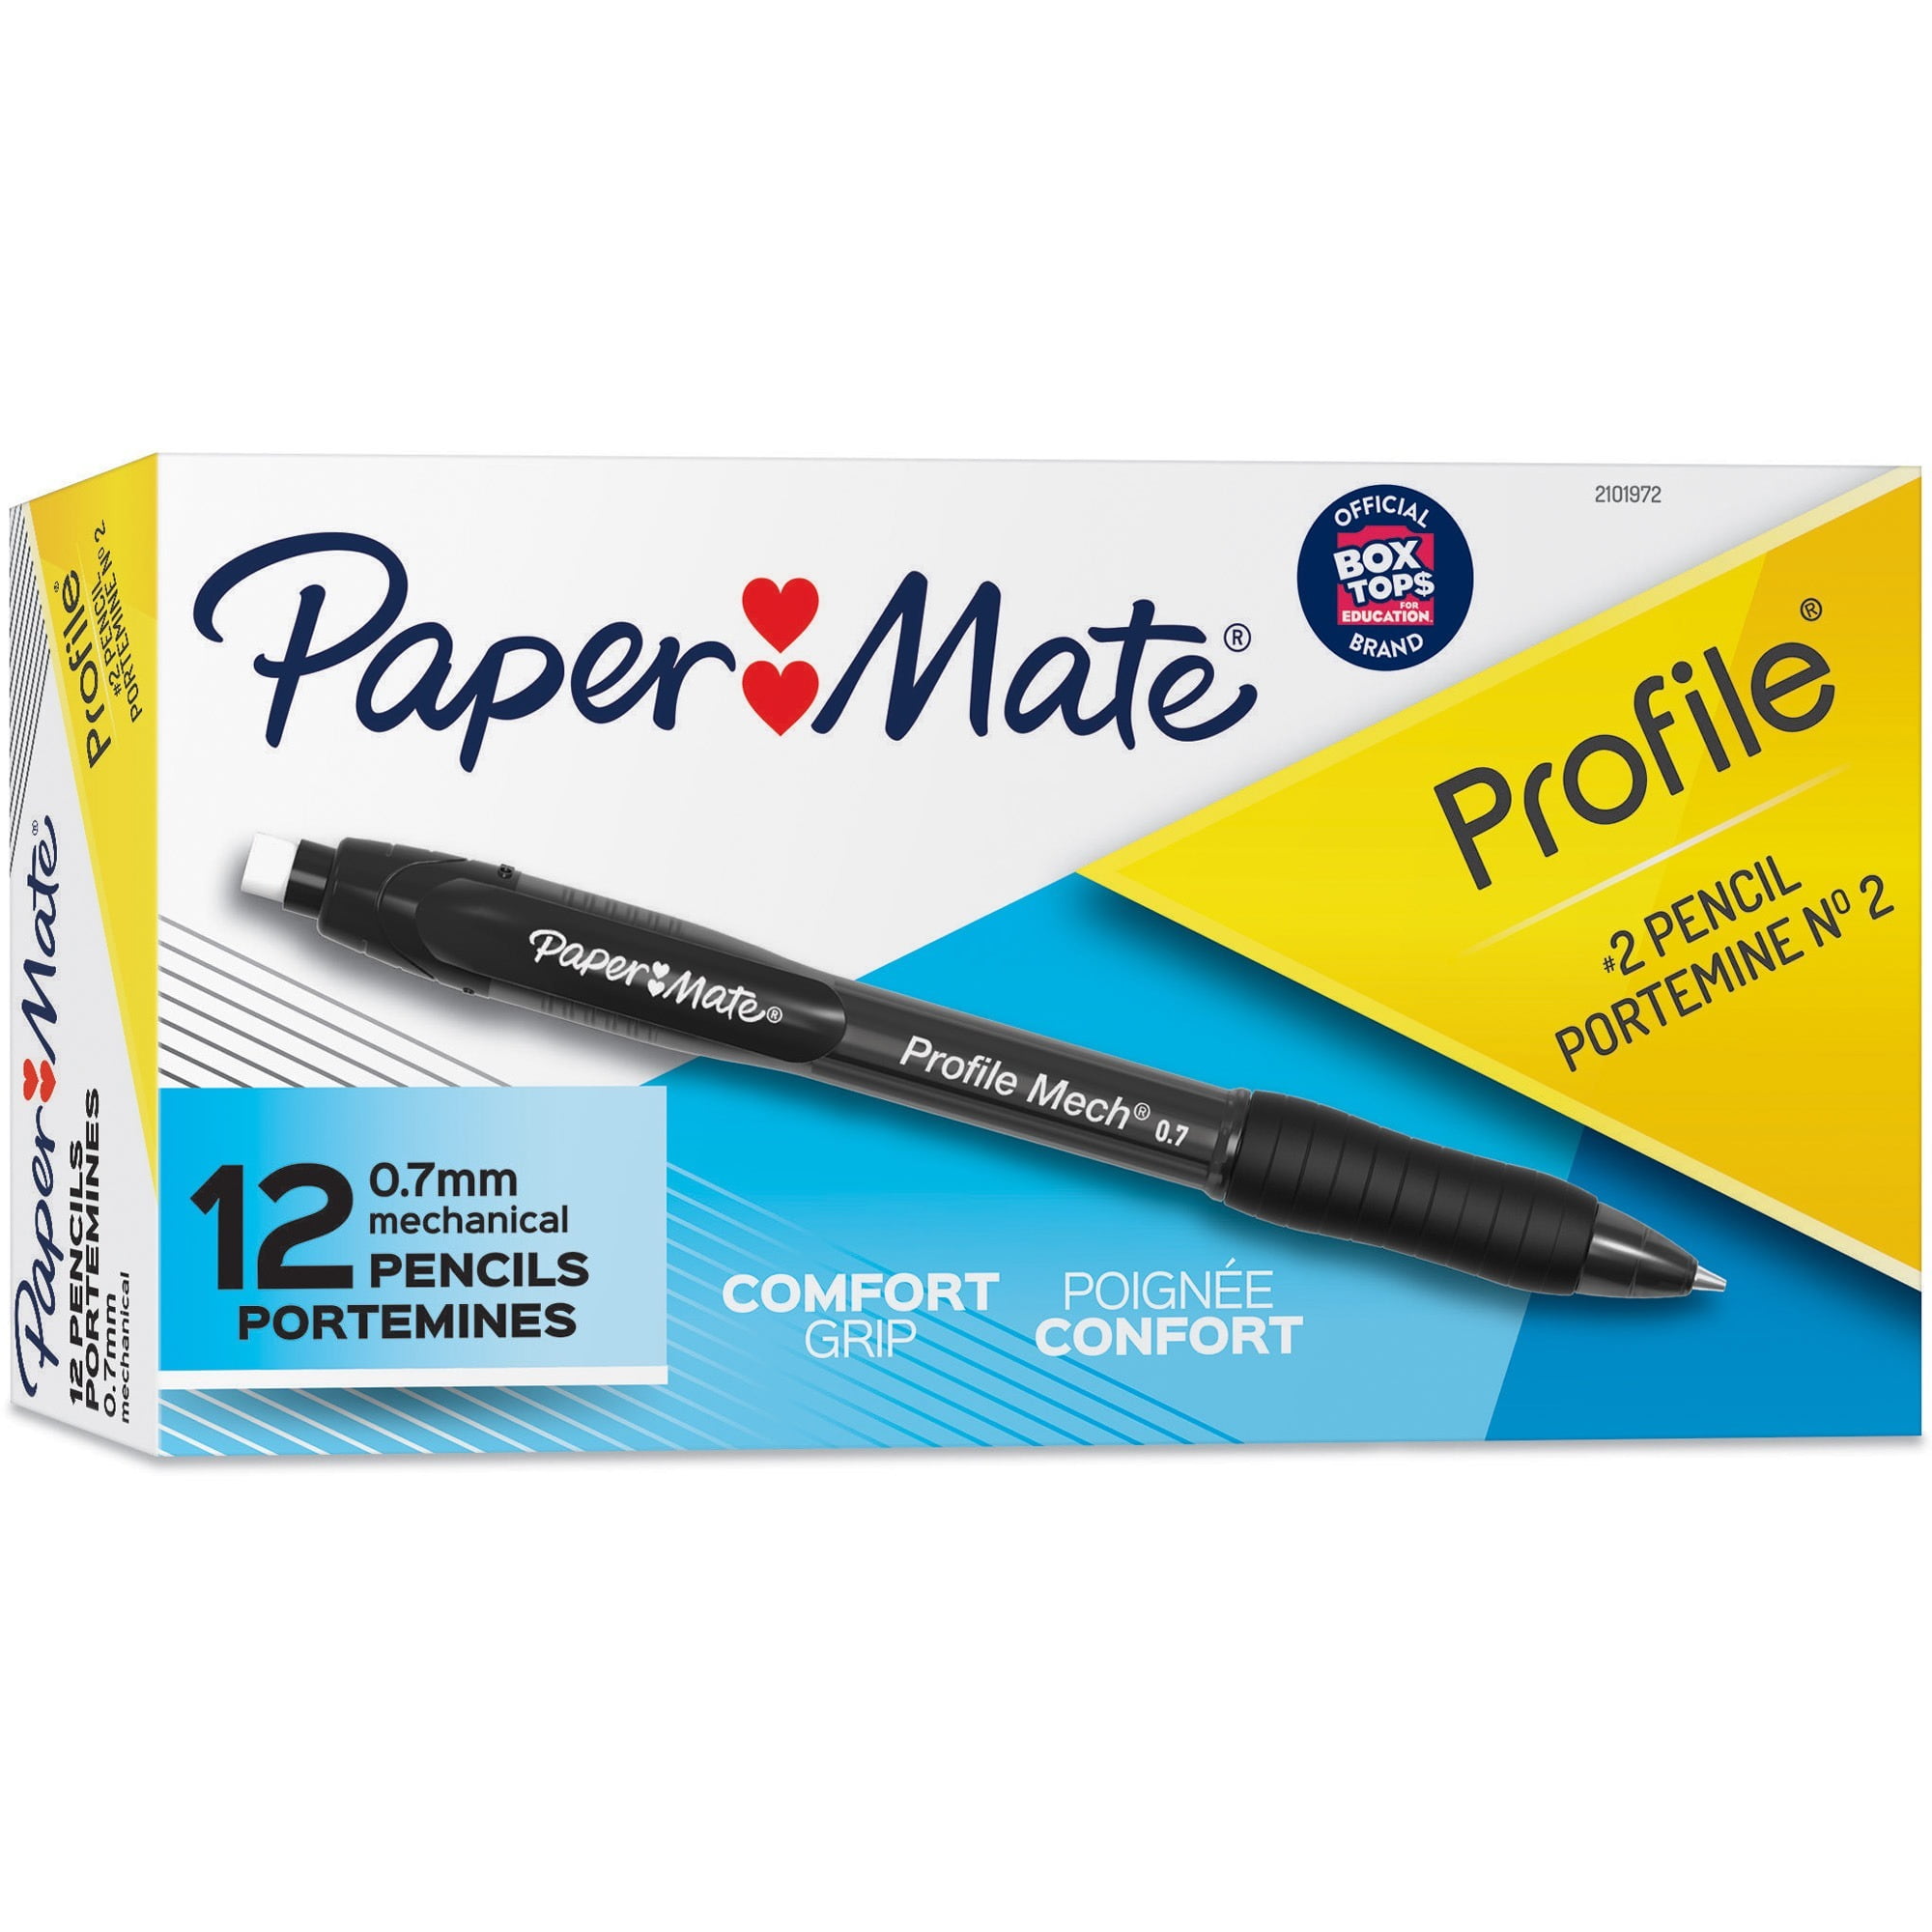 Office Use - New Profile Mech Mechanical Pencil Set Black Barrels 12 Count 0.7mm #2 Pencil Lead Great for Home School